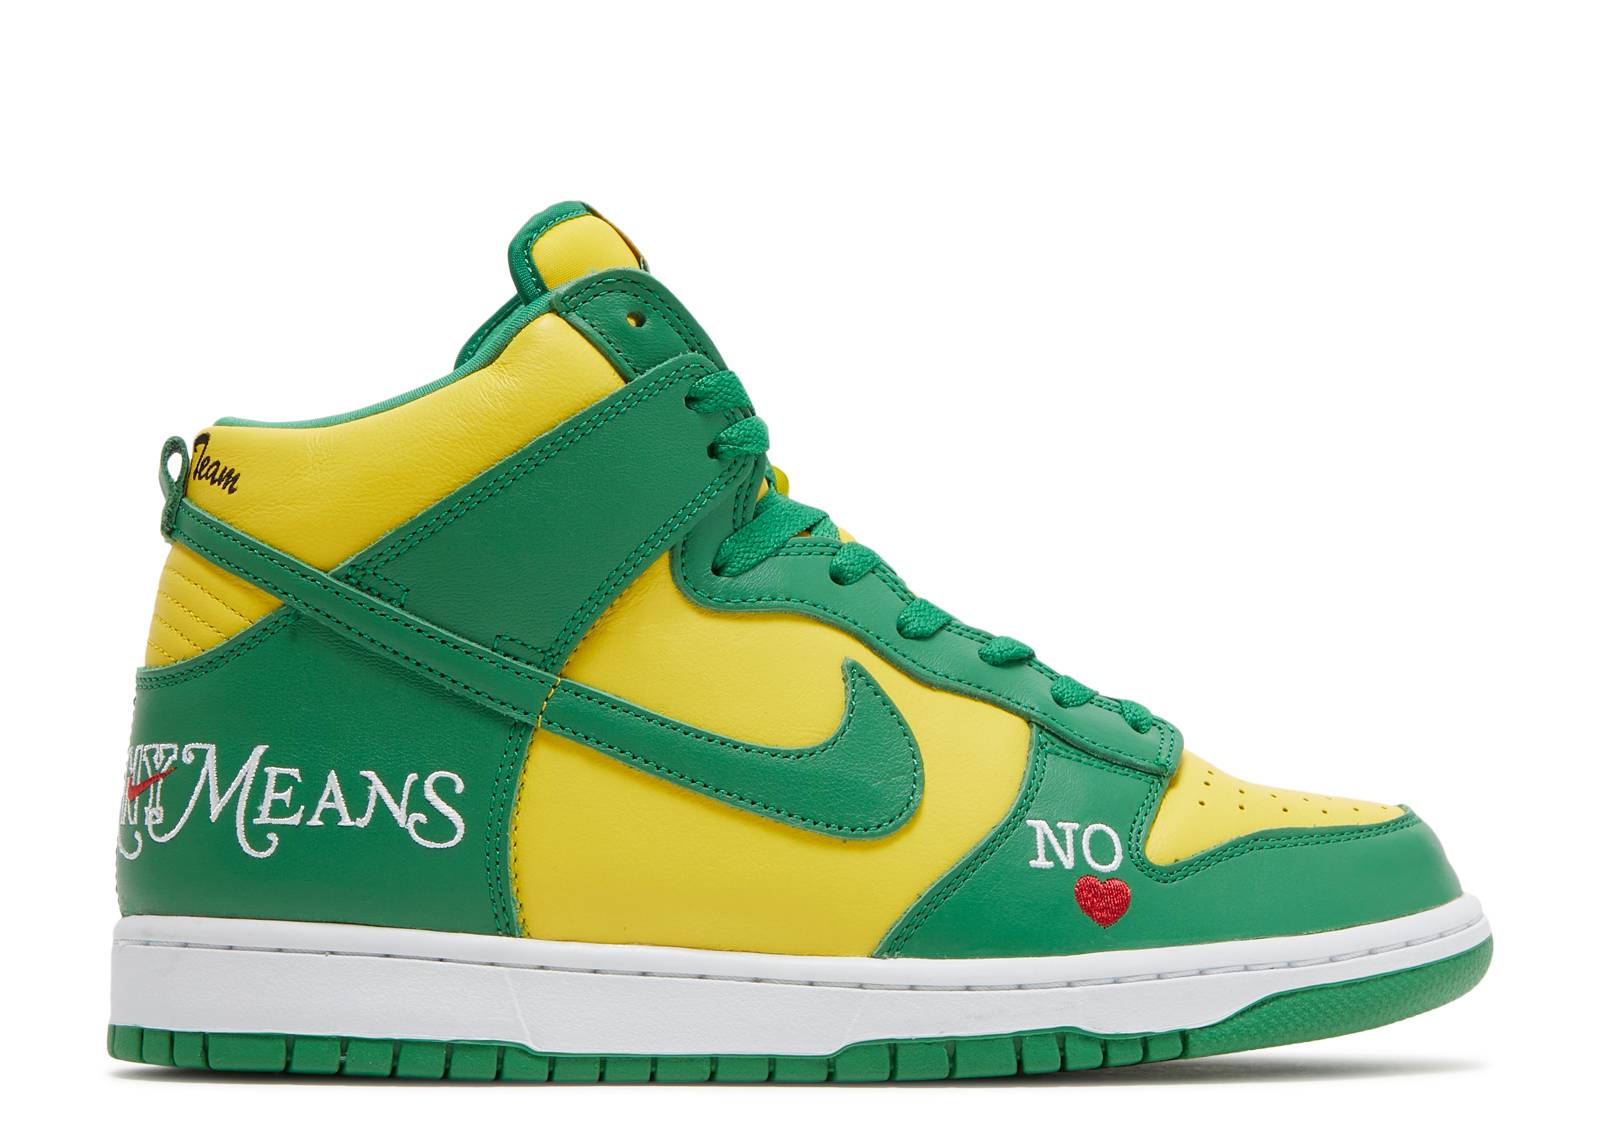 Supreme x Dunk High SB 'By Any Means - Brazil'